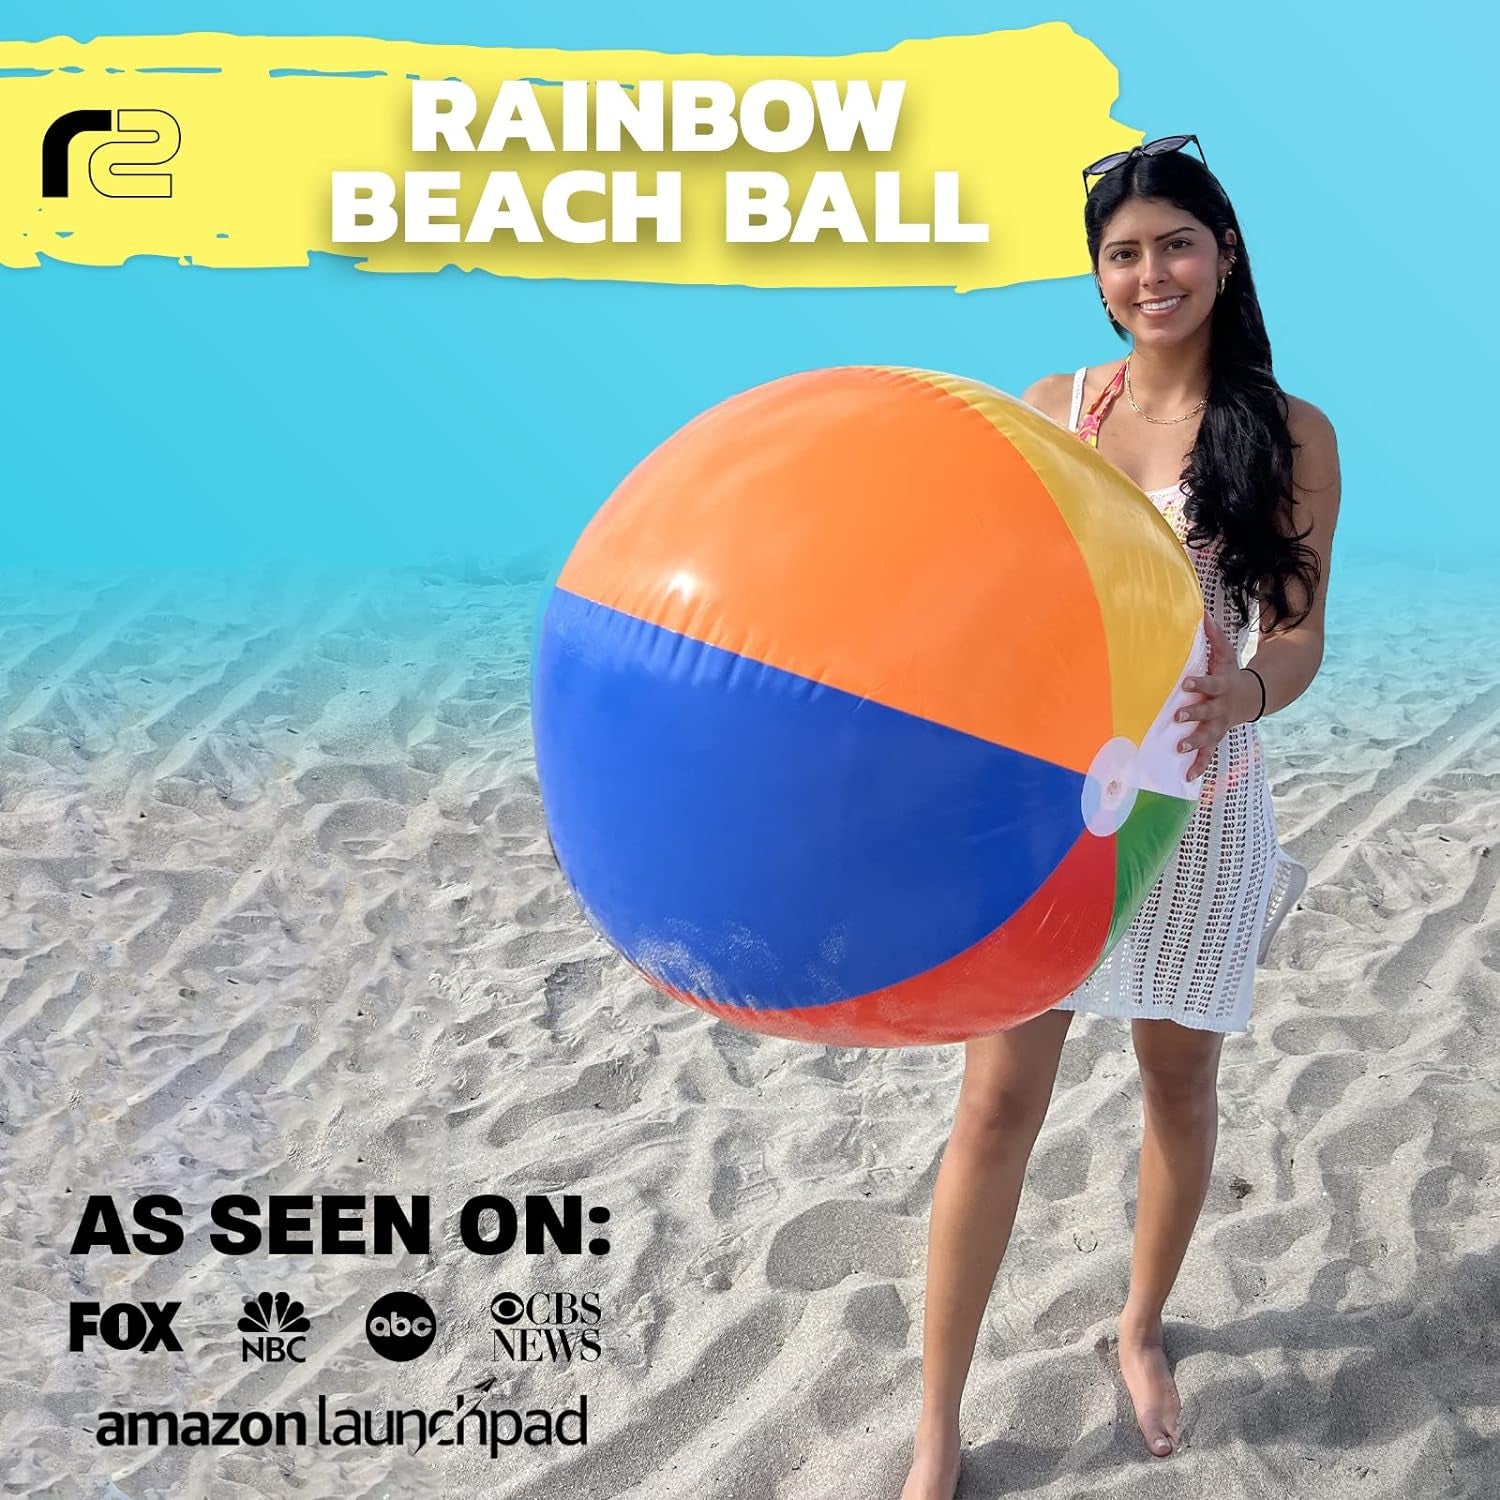 Large Beach Ball for Kids or Adults - Easy to Inflate and Durable Material to Last for Years of Fun - Comes in 3 Colors - Great Gift Idea for Boys & Girls All Ages - Also Best Pool Party Decoration Toy